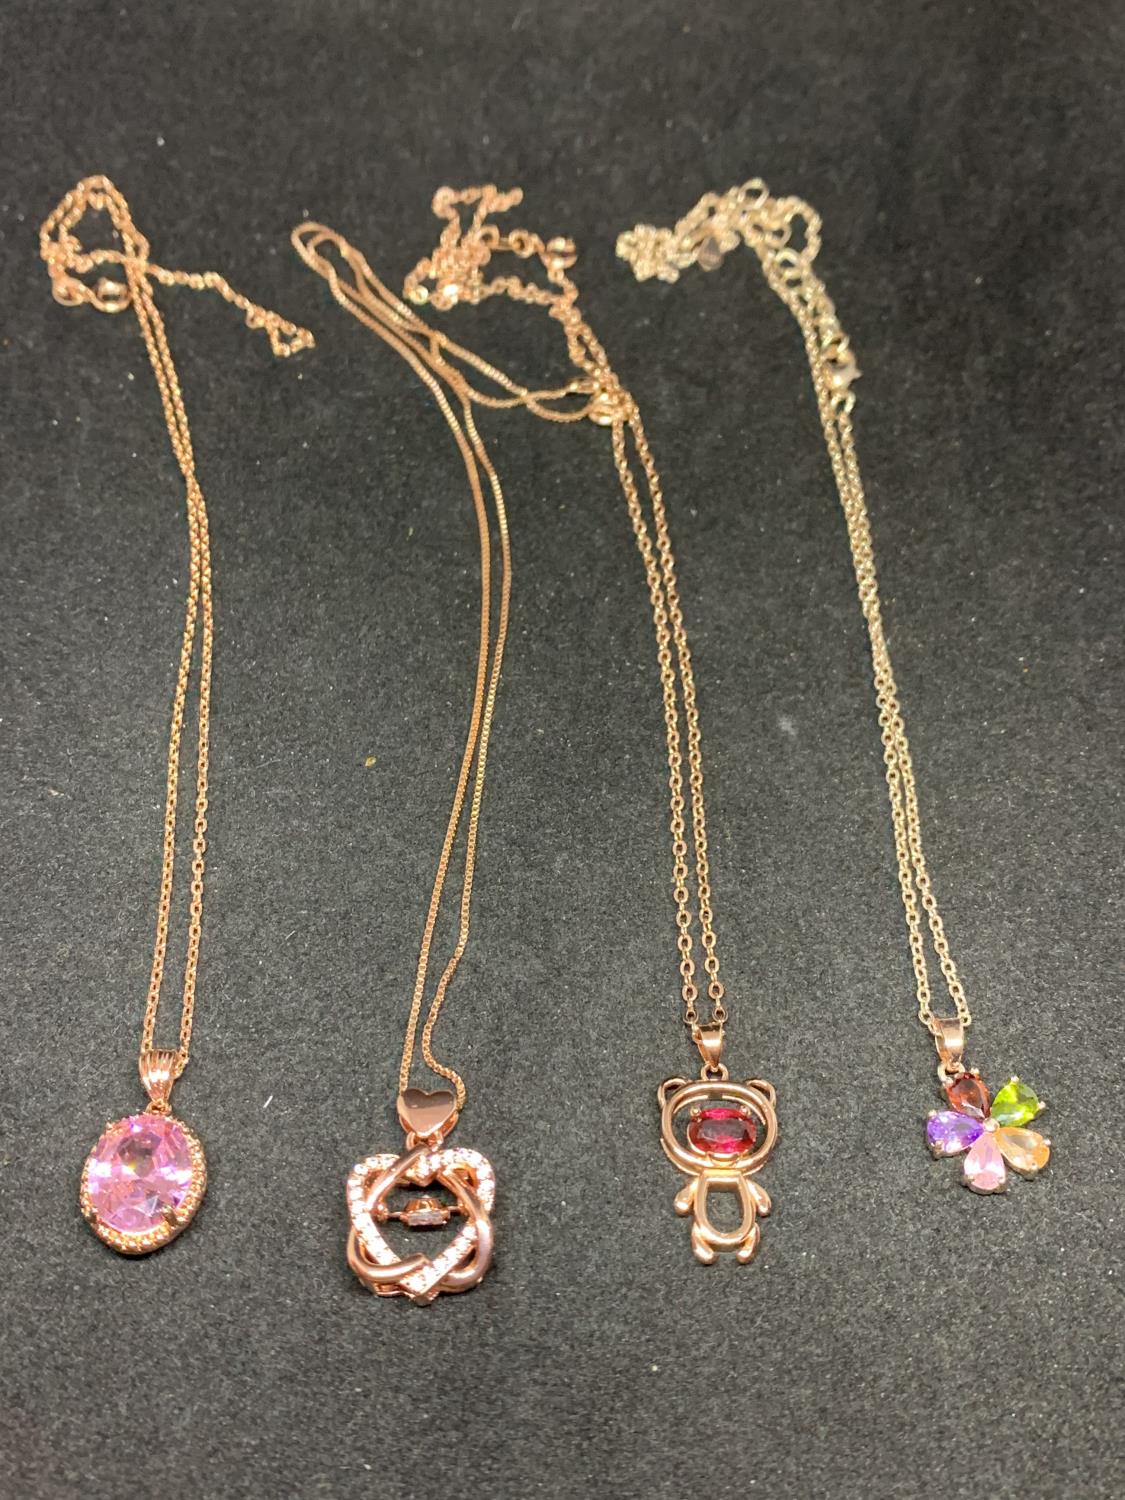 FOUR SILVER NECKLACES MARKED 925 WITH PENDANTS TO INCLUDE A TEDDY, FLOWER ETC WITH COLOURED STONES